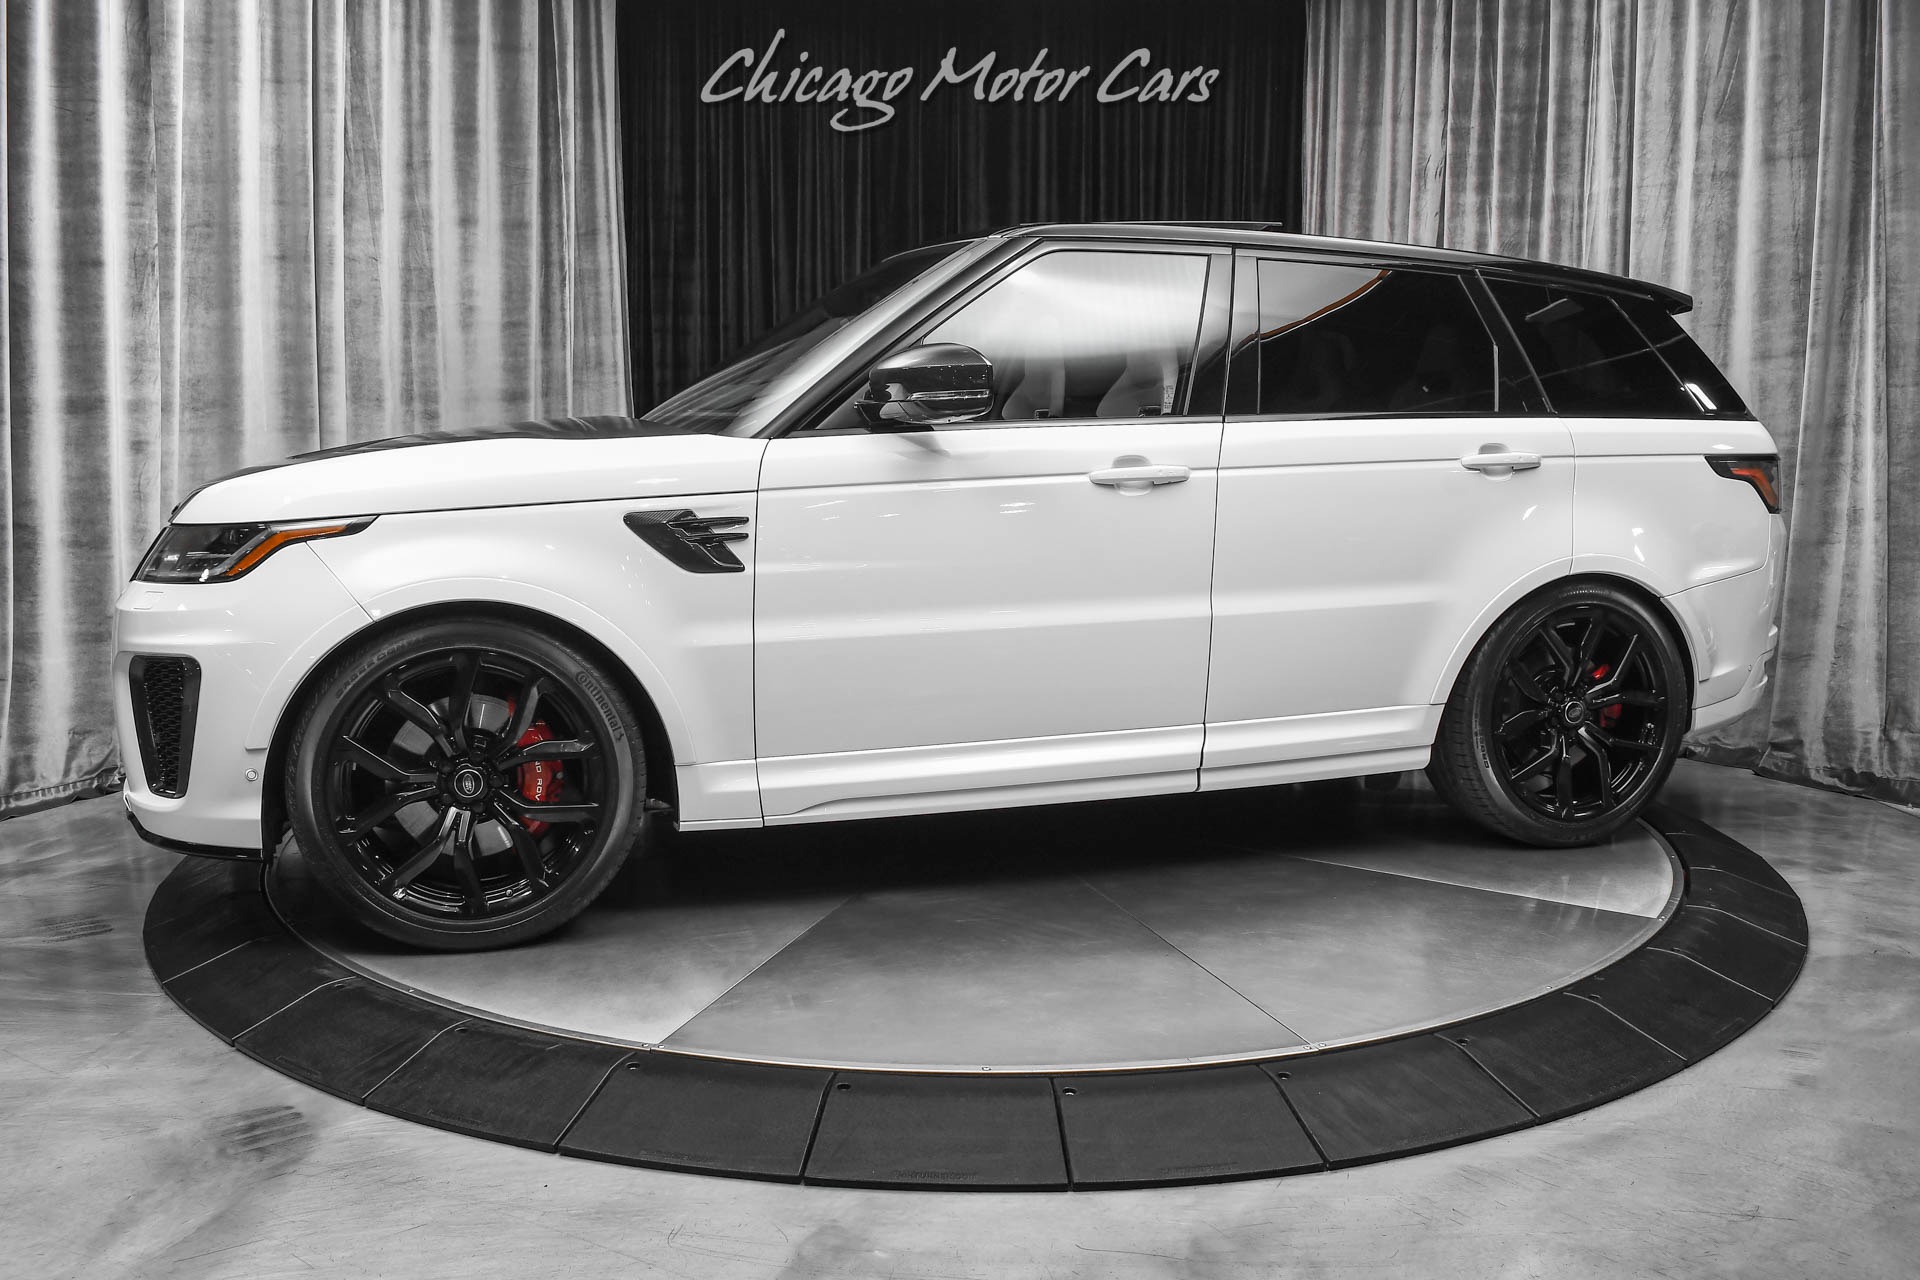 Used 2021 Land Rover Range Rover Sport SVR Carbon Edition SUV LOW Miles!  Driver Assist Pkg! Supercharged V8 LOADED For Sale ($124,800) | Chicago  Motor Cars Stock #MA767002-CM